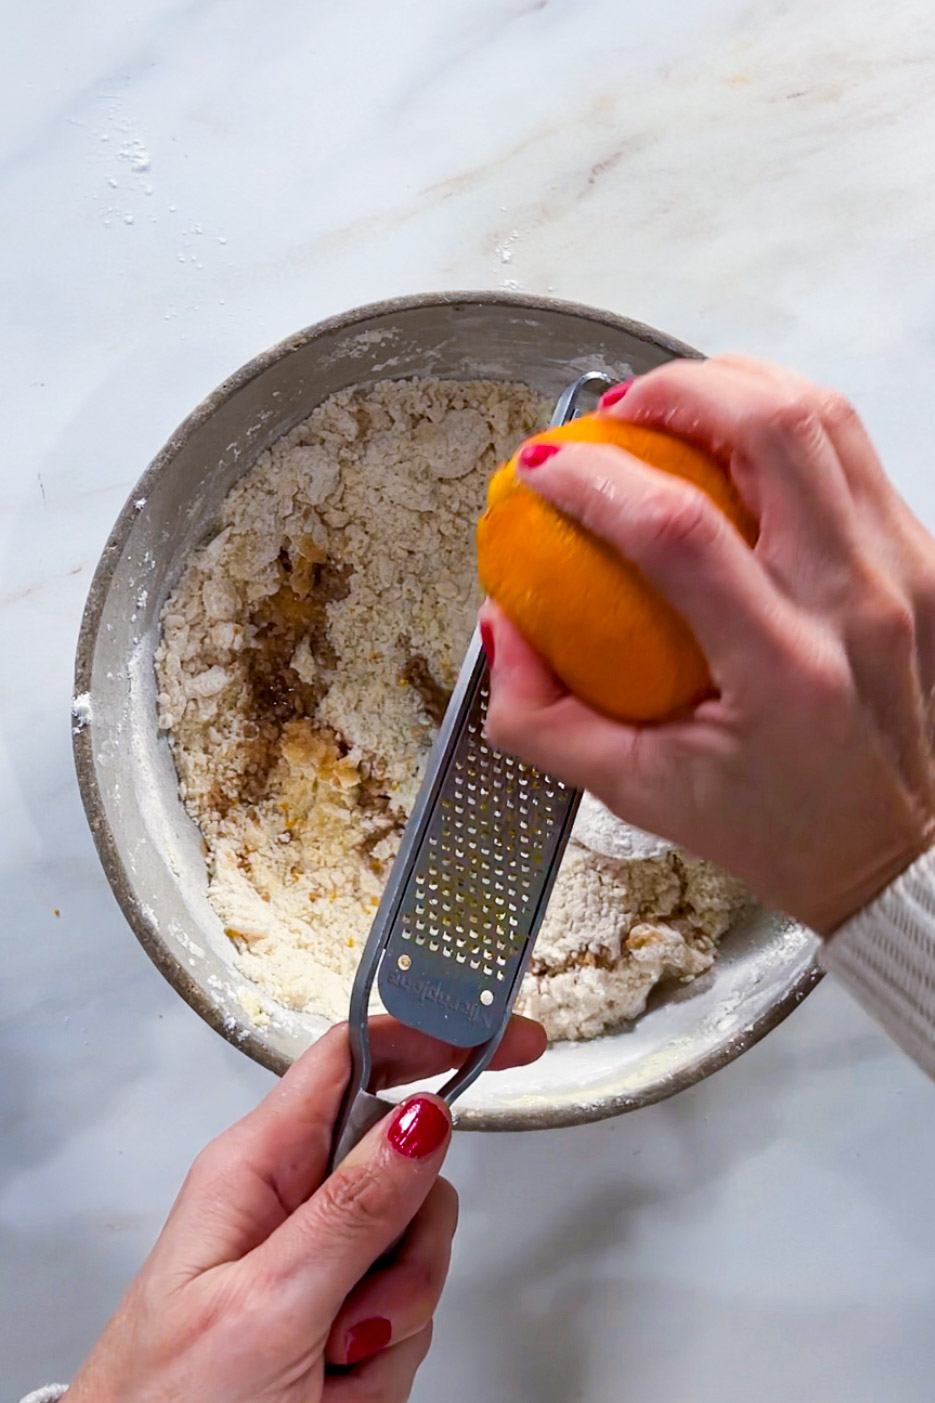 A person grating an orange zest into a bowl of flour to prepare Day of the Dead cookies.